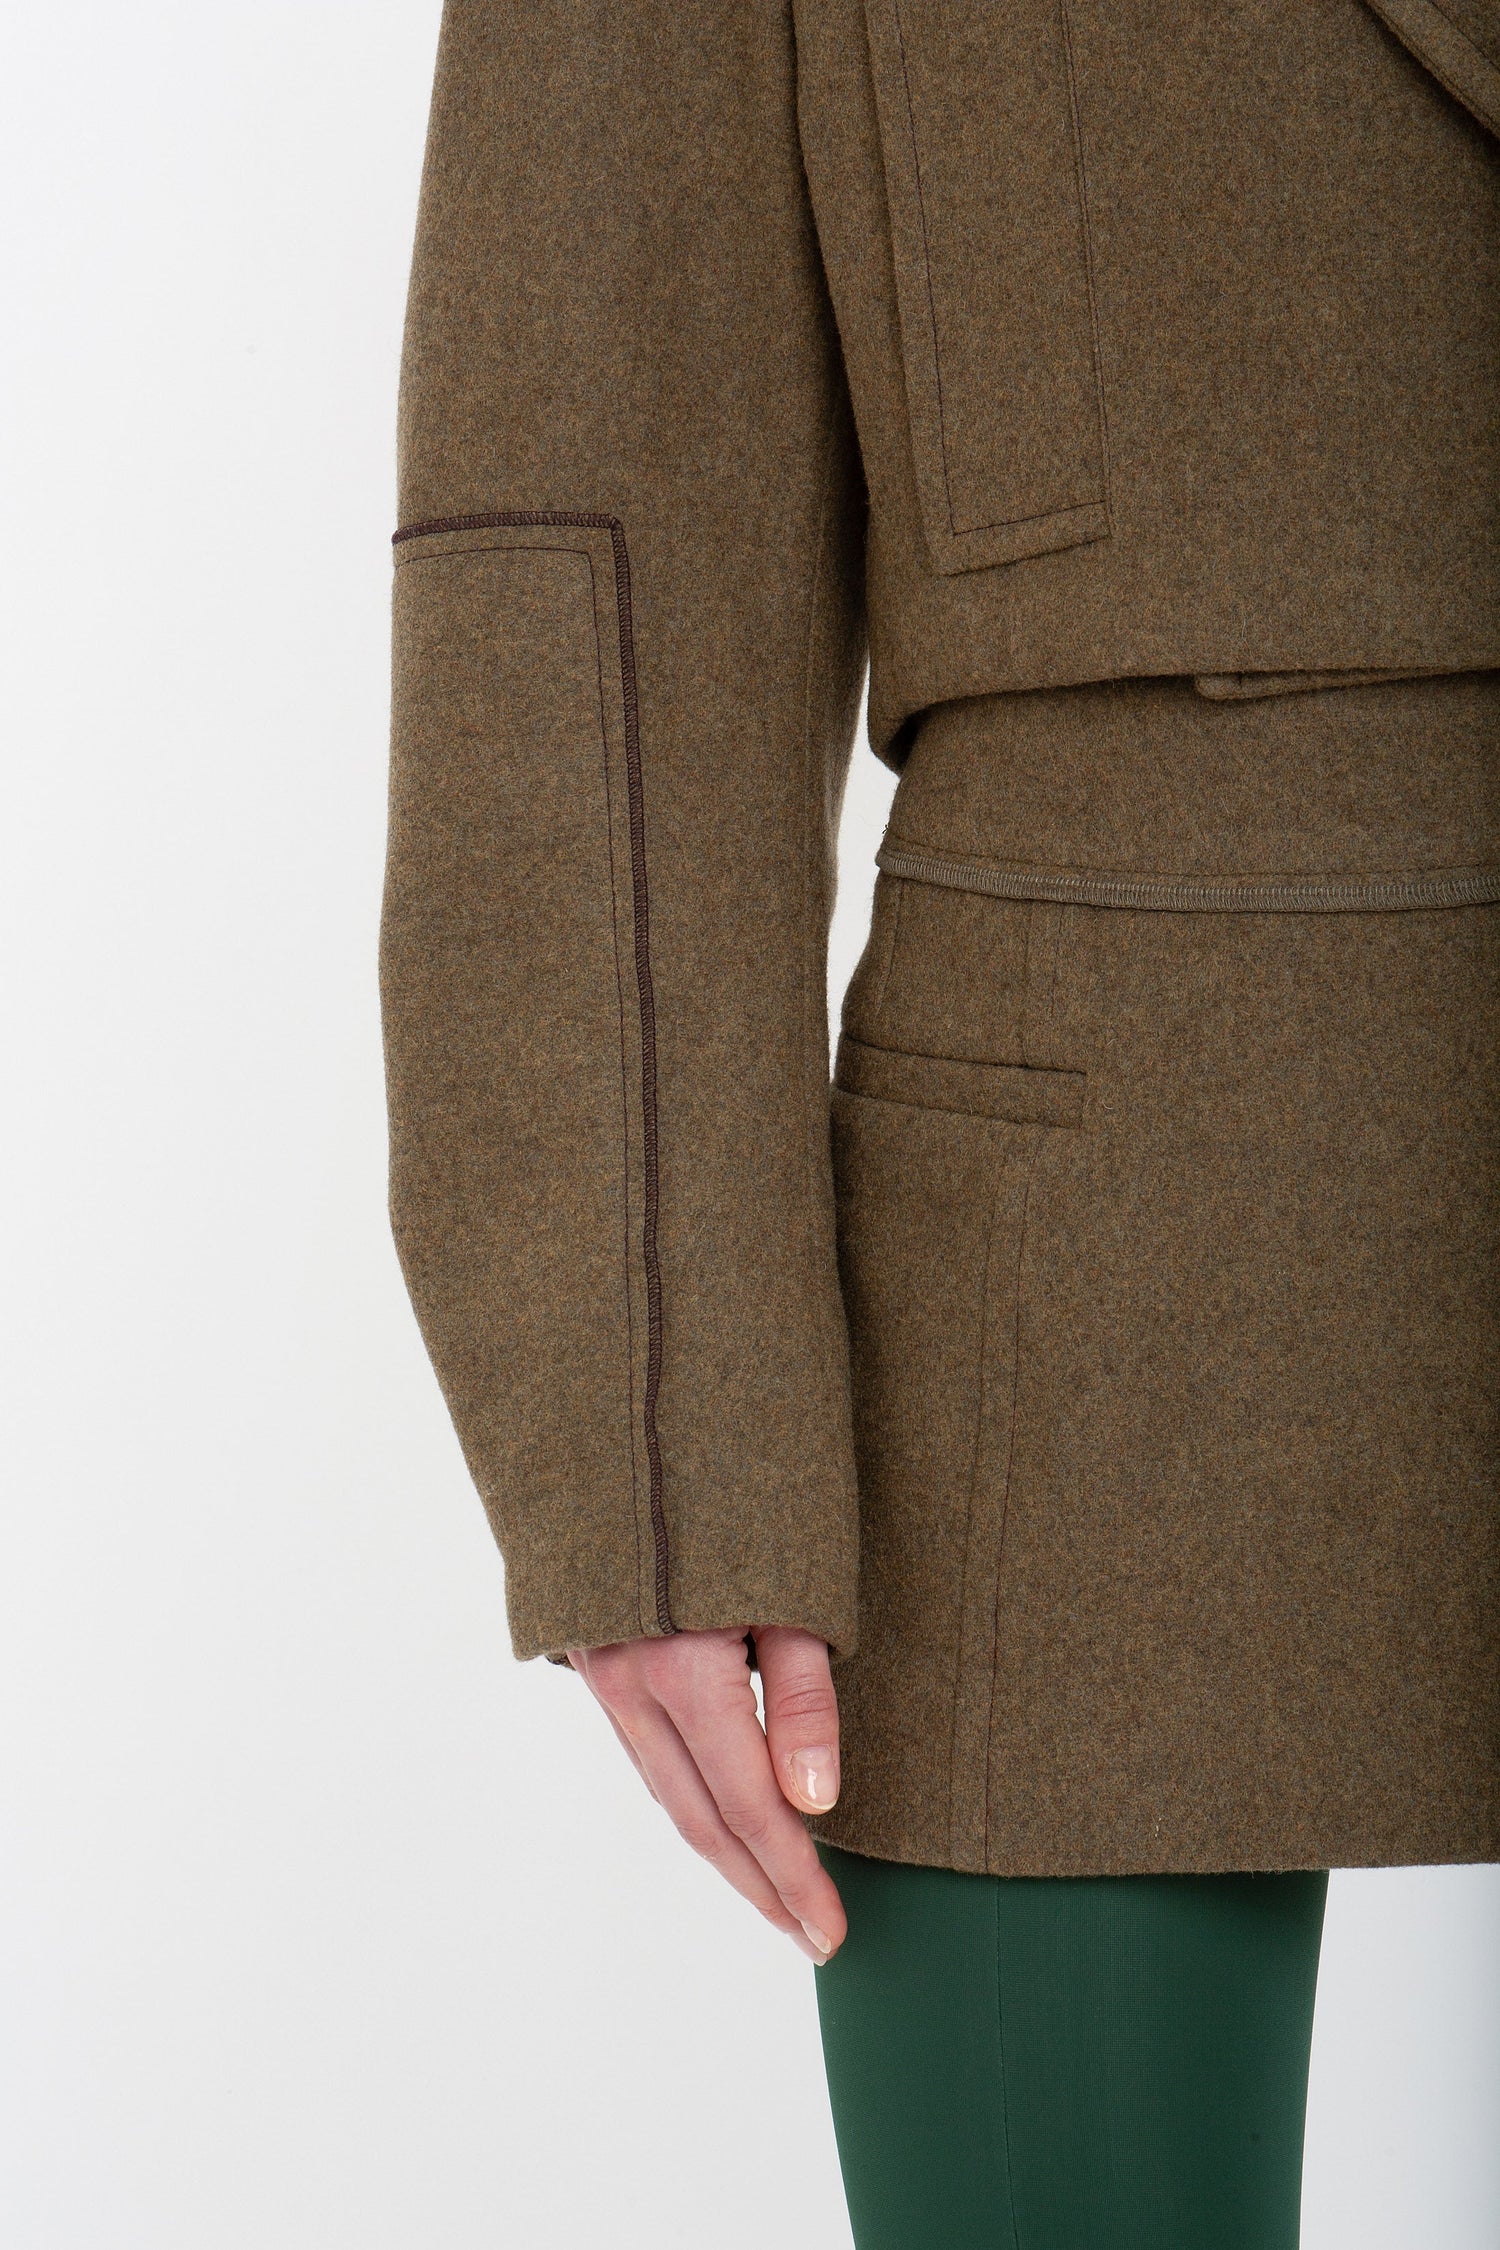 Close-up of a person wearing a brown coat with visible stitching and a Victoria Beckham Tailored Mini Skirt In Khaki, with their left hand resting at their side.